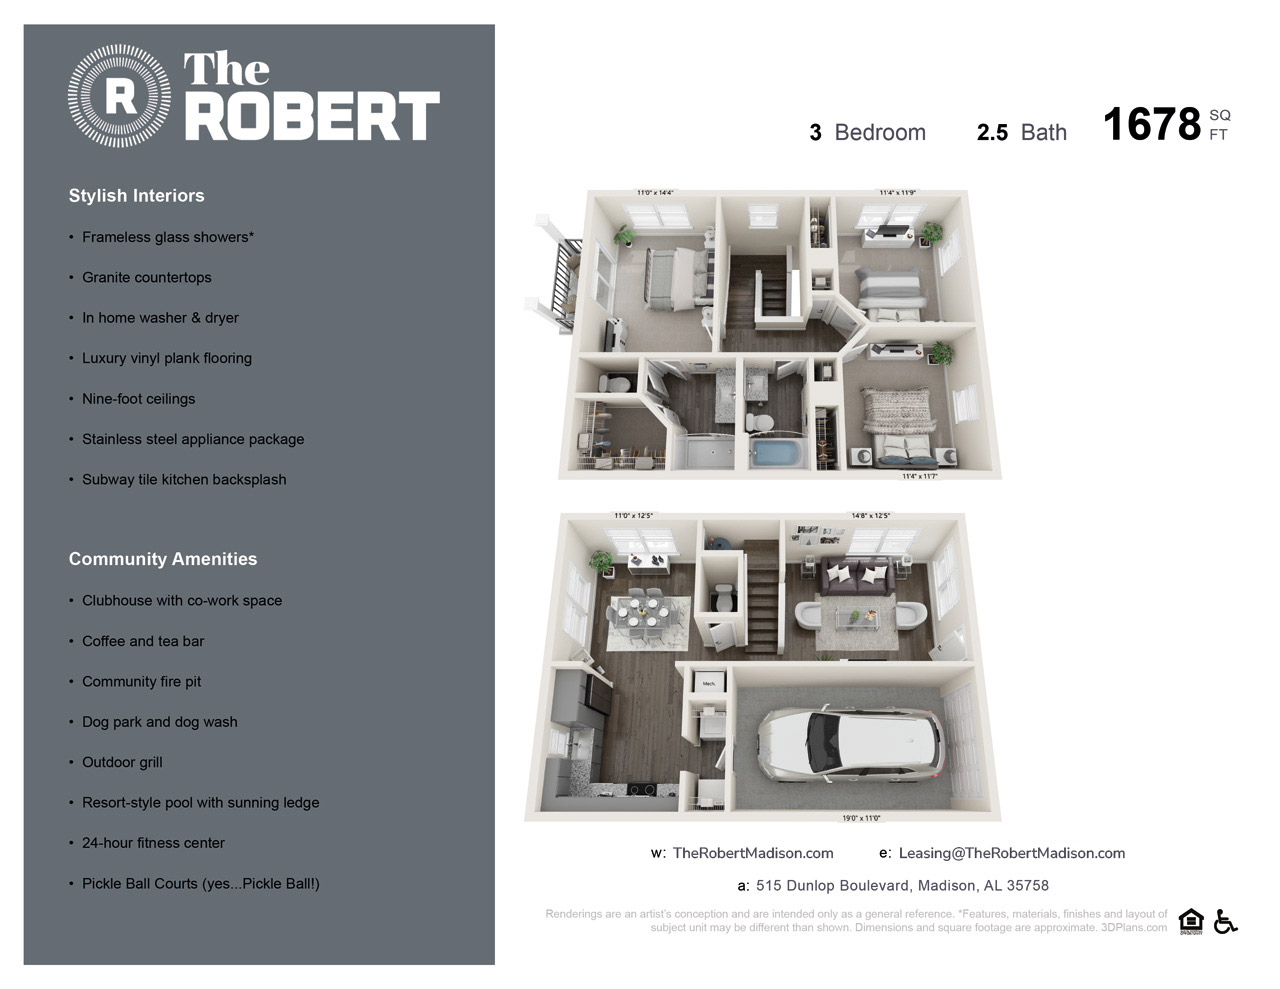 The Robert - Madison, Alabama. Townhome Combined - 3 Bed, 2.5 Bath